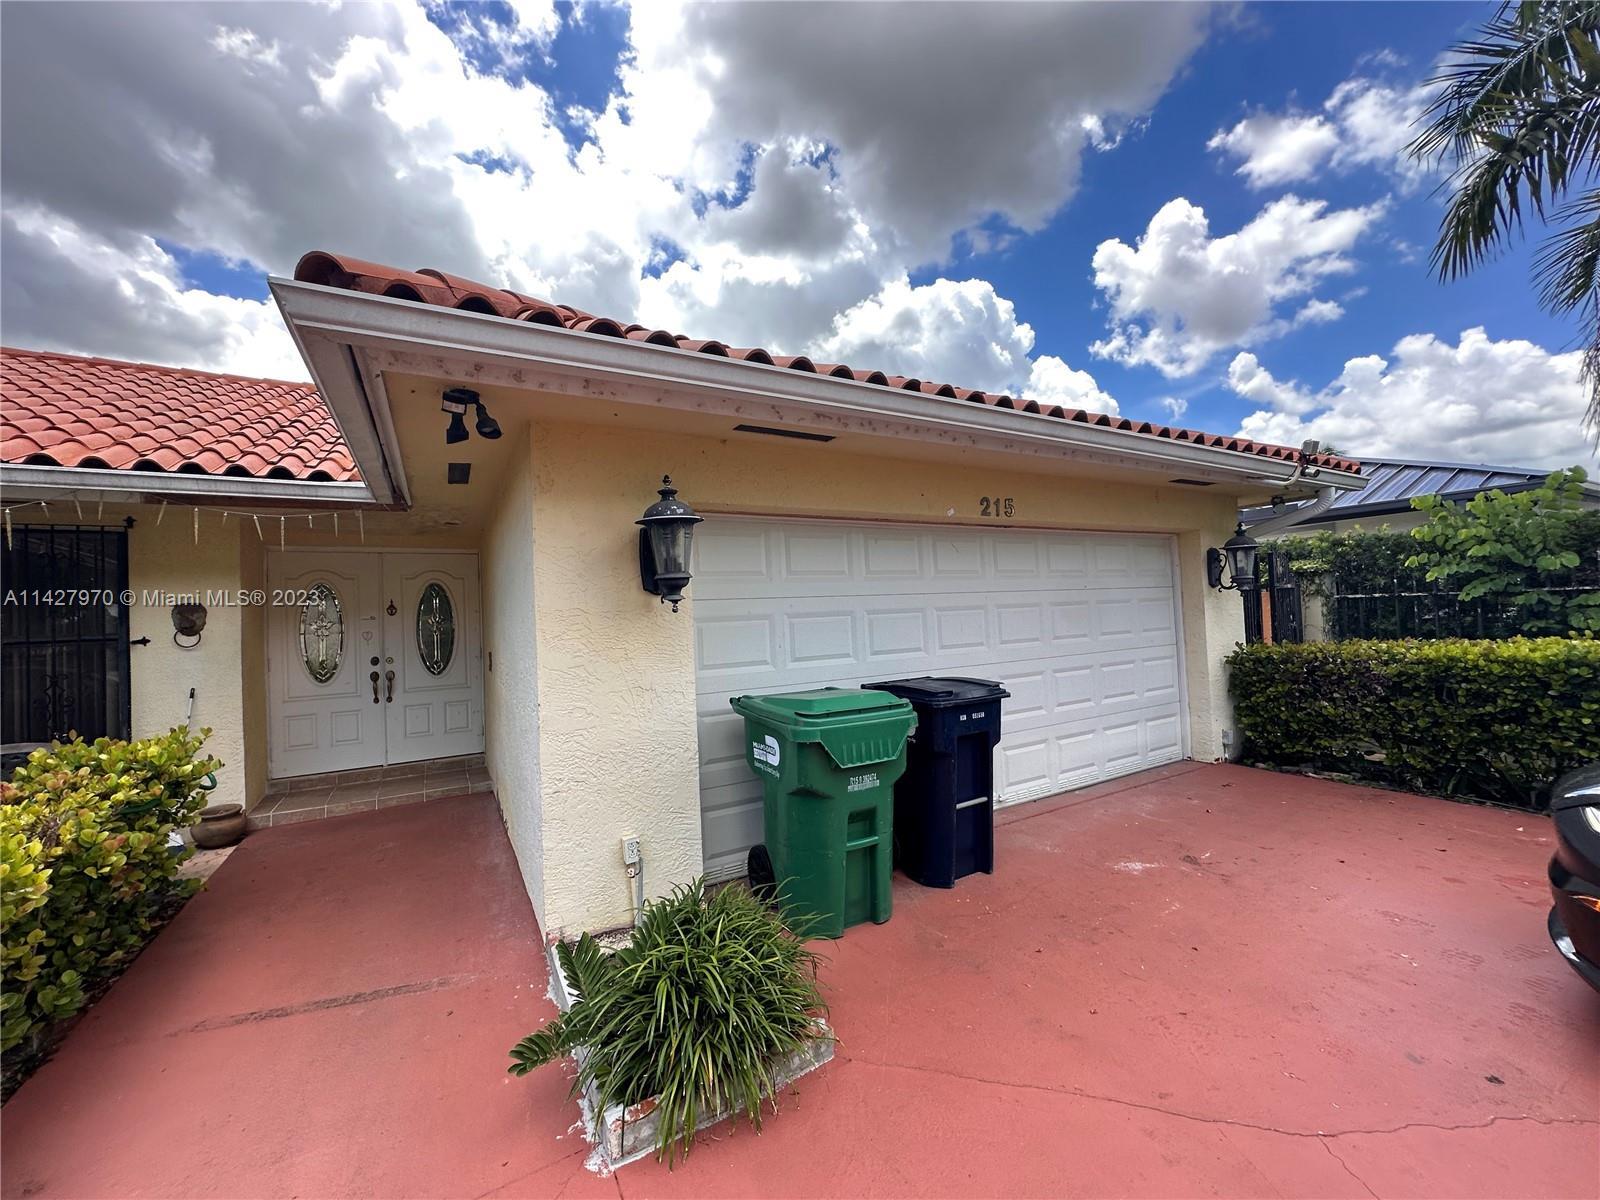 Photo of 215 NW 136th Ct in Miami, FL